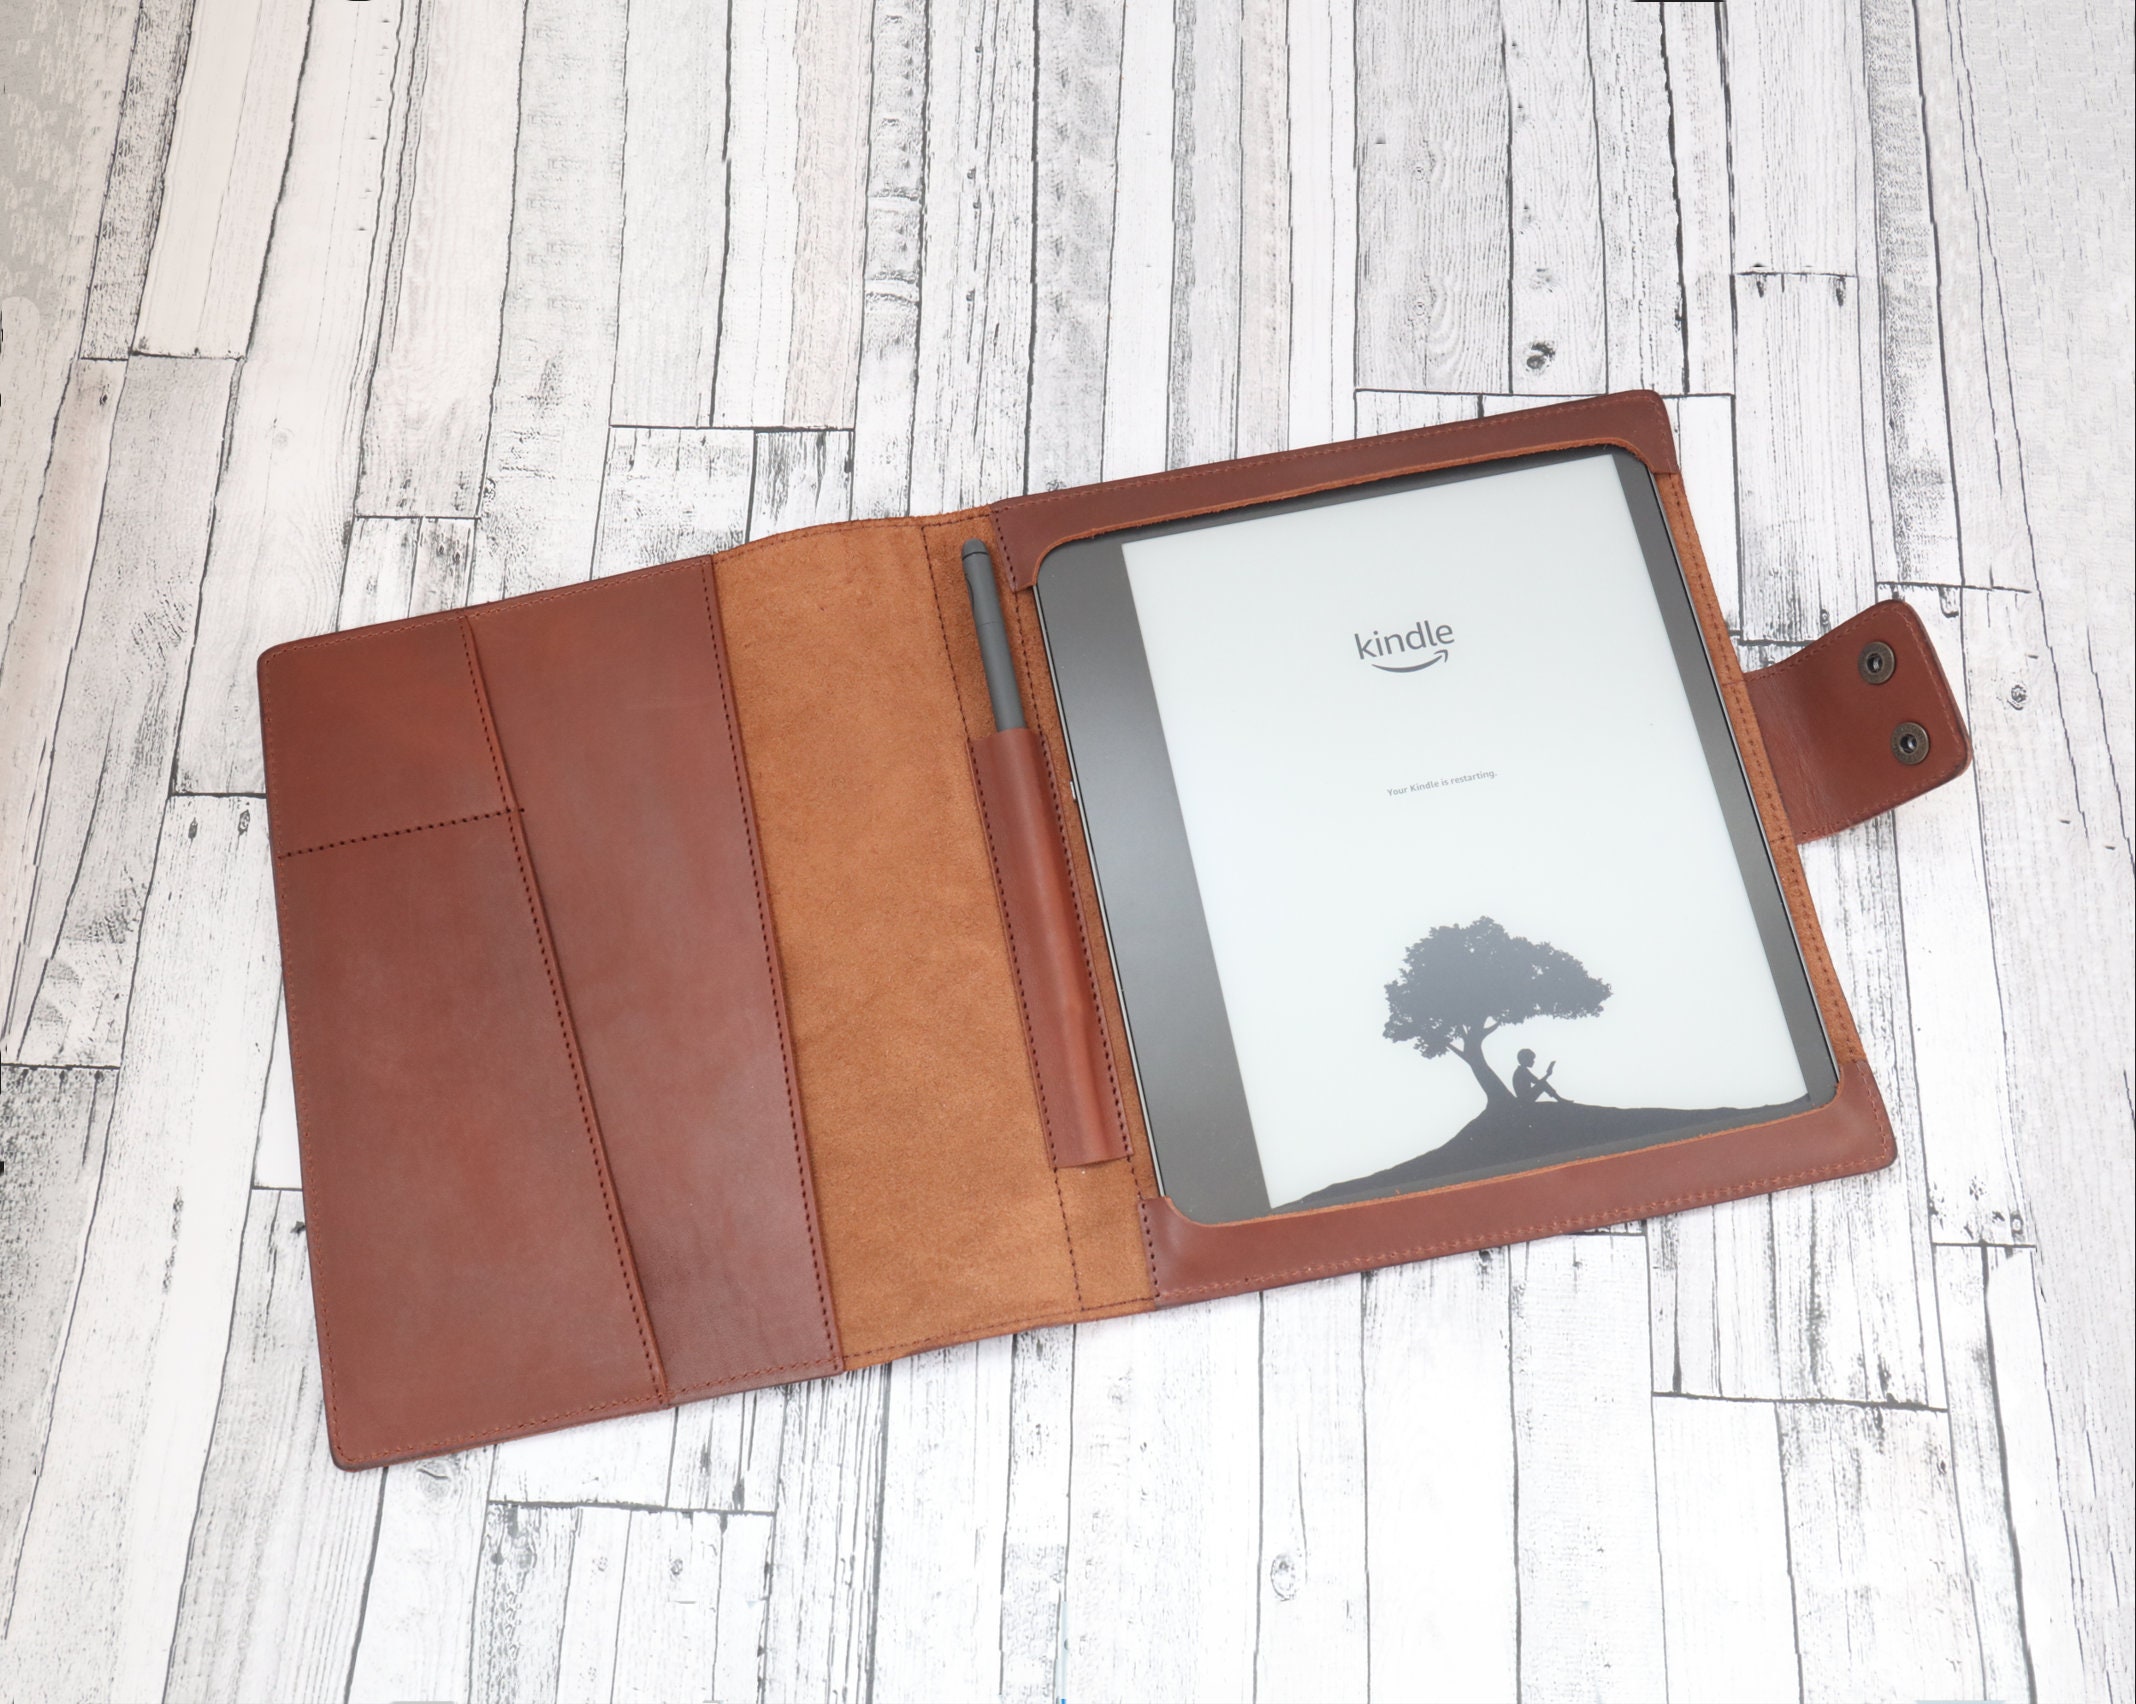 Kindle Case from Moleskine Mixes Paper and E-Ink